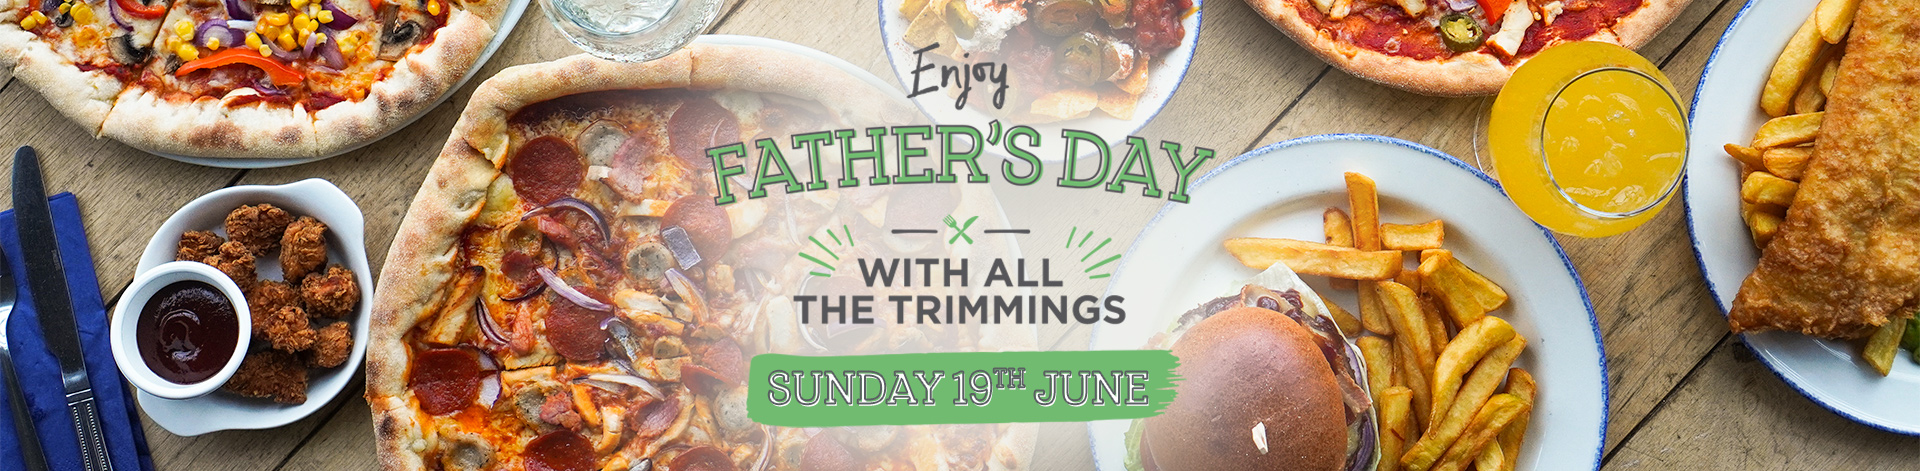 Fathers Day at The Crown